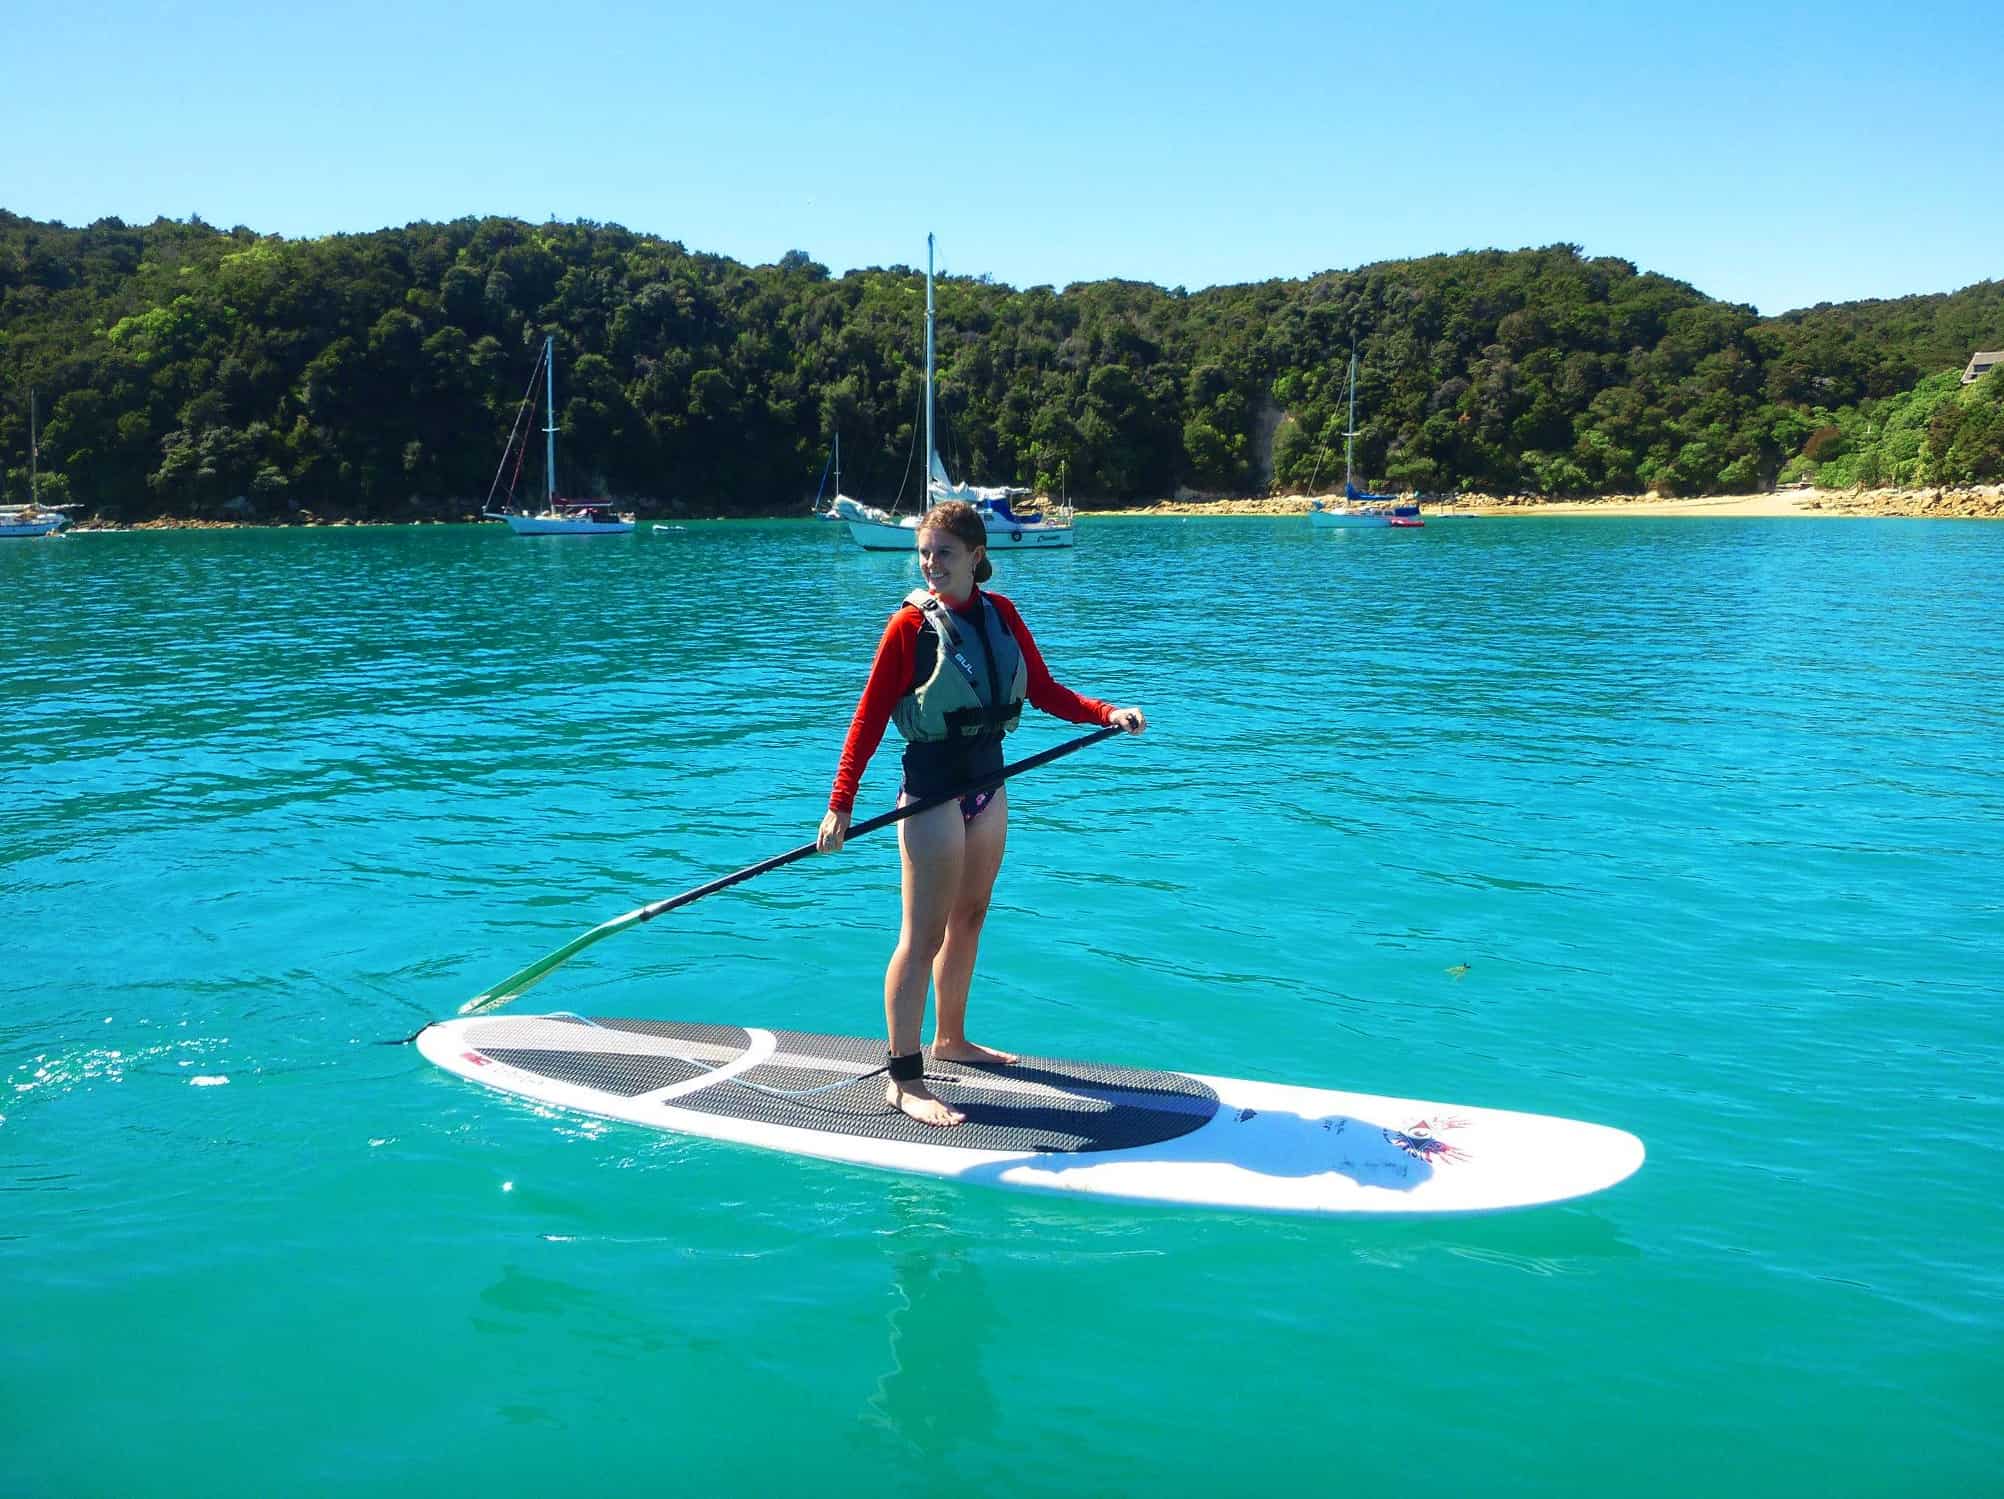 Woman standing on a paddleboard in a bay in New Zealand, with four small yachts anchored in the background.